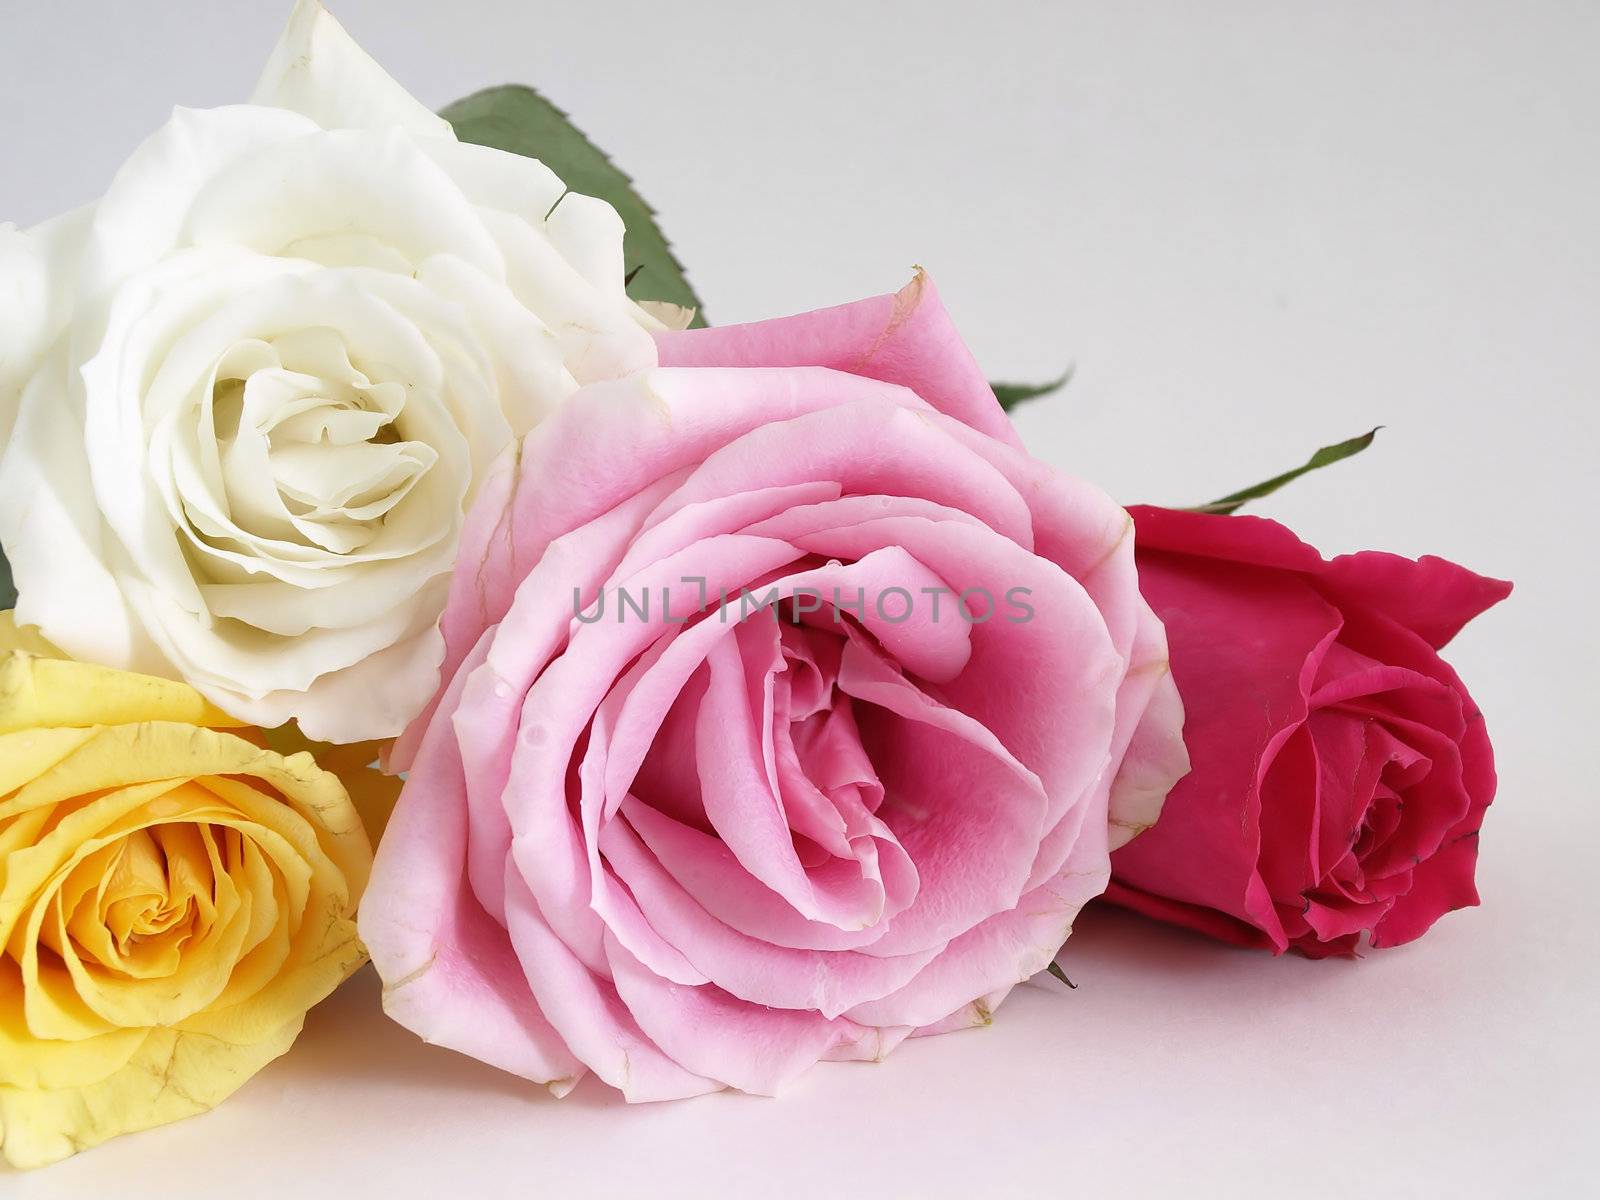 A beautiful bouquet of open roses laying on a white surface.